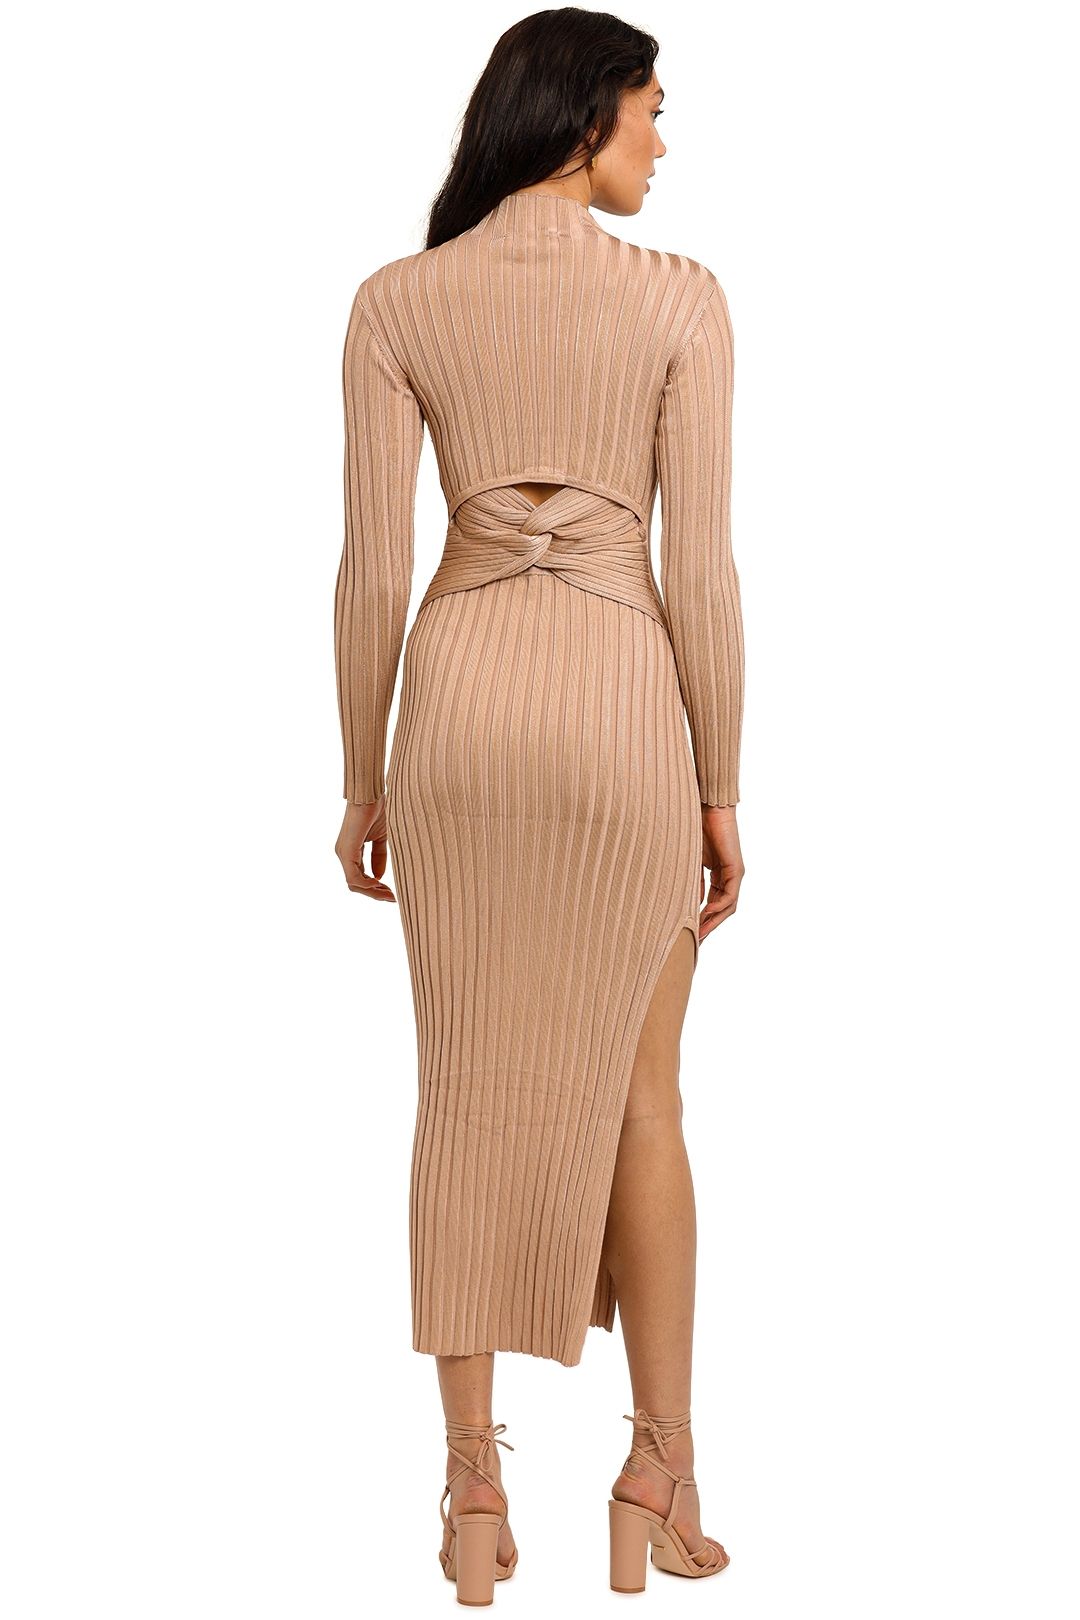 Significant Other Sylvia Knit Dress Champagne ribbed